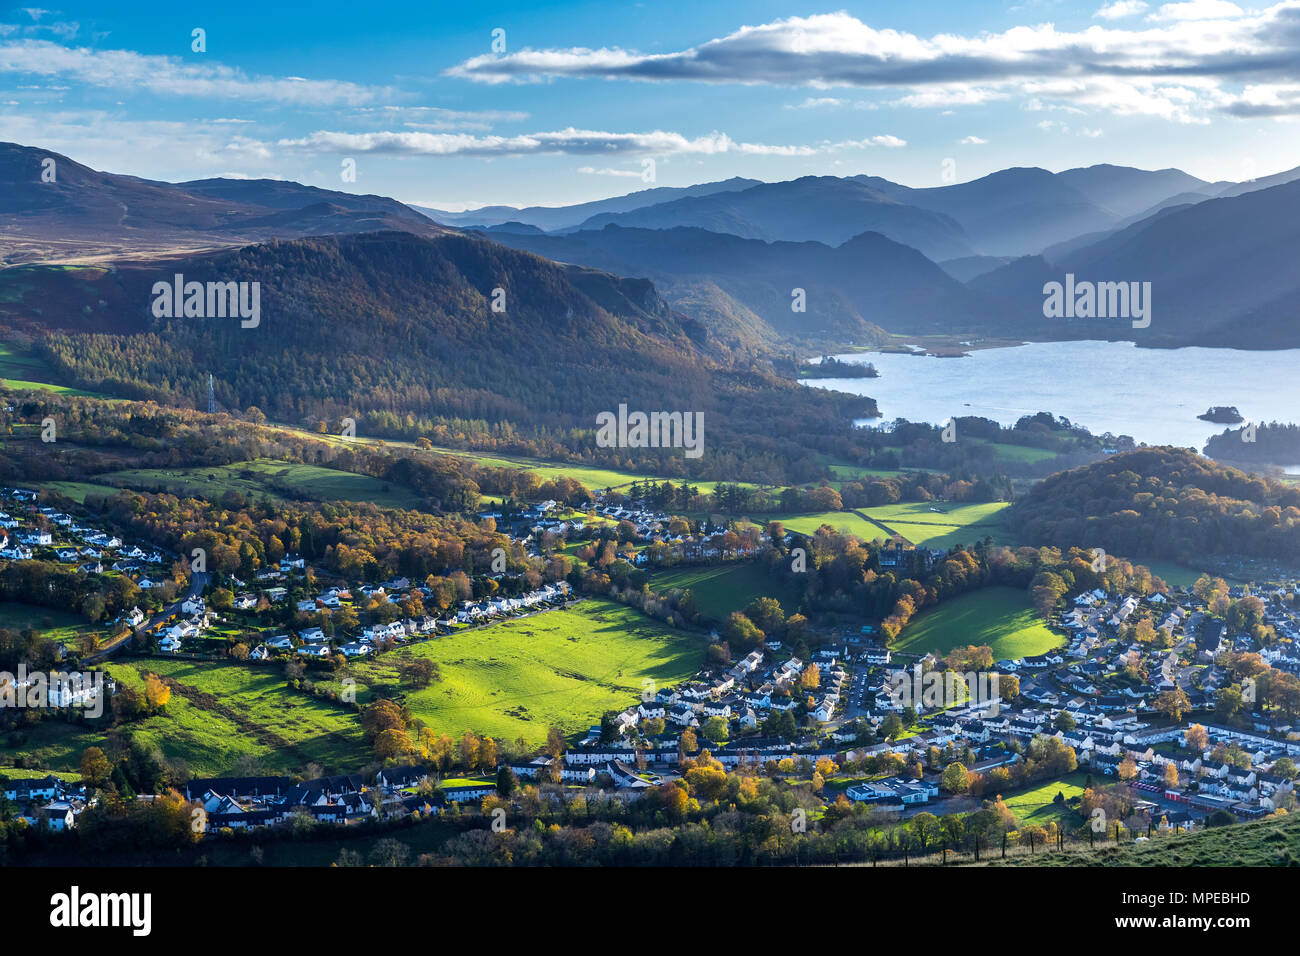 Keswick and Derwentwater seen from Latrigg summit, Lake District National Park, Cumbria, England, United Kingdom, Europe. Stock Photo